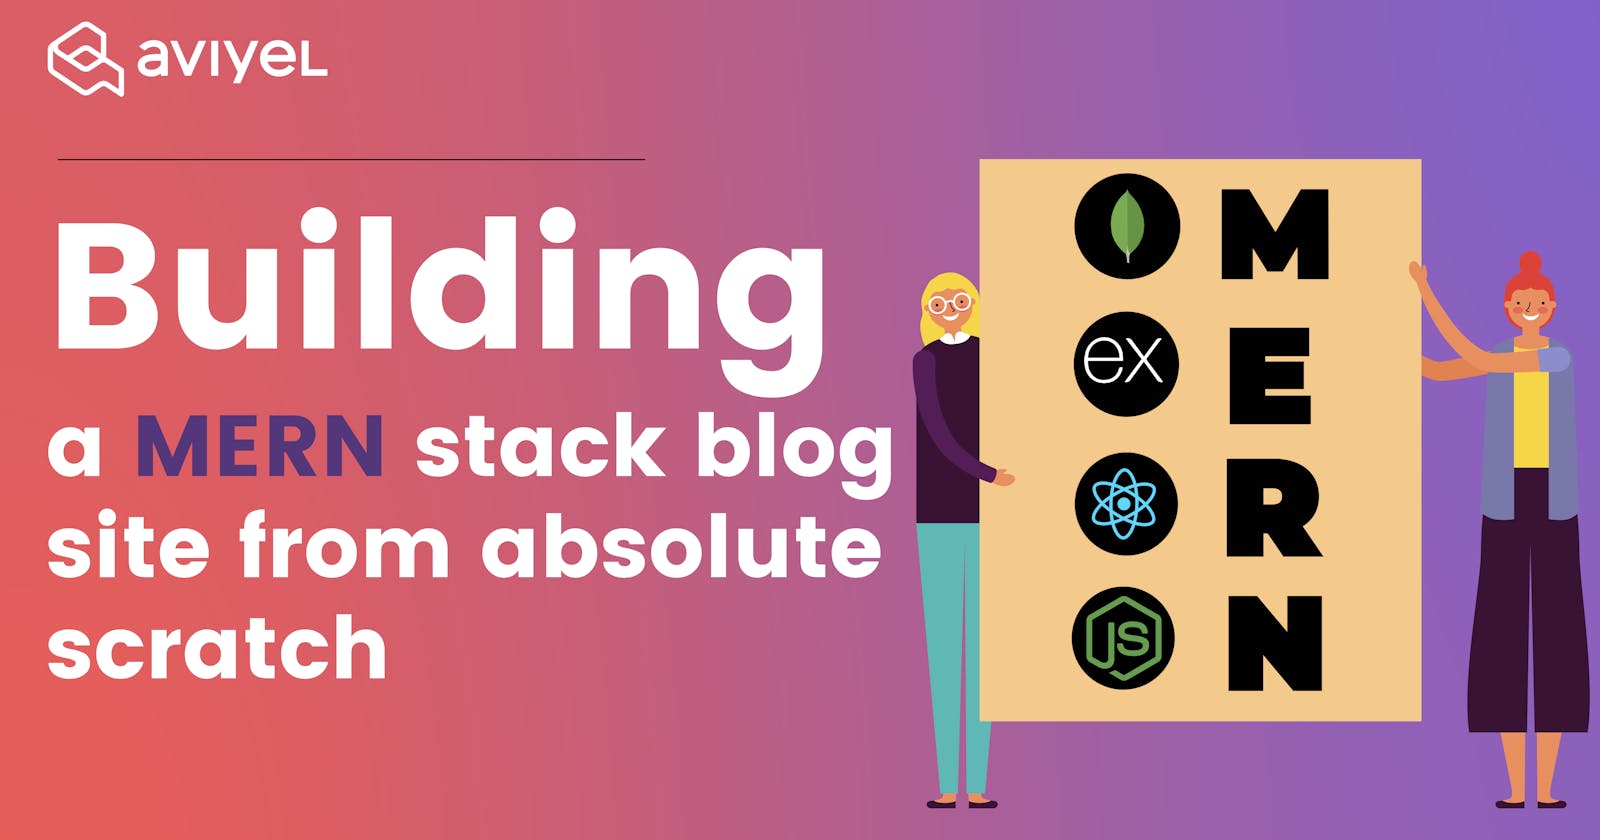 Building a MERN stack simple blog site from absolute scratch